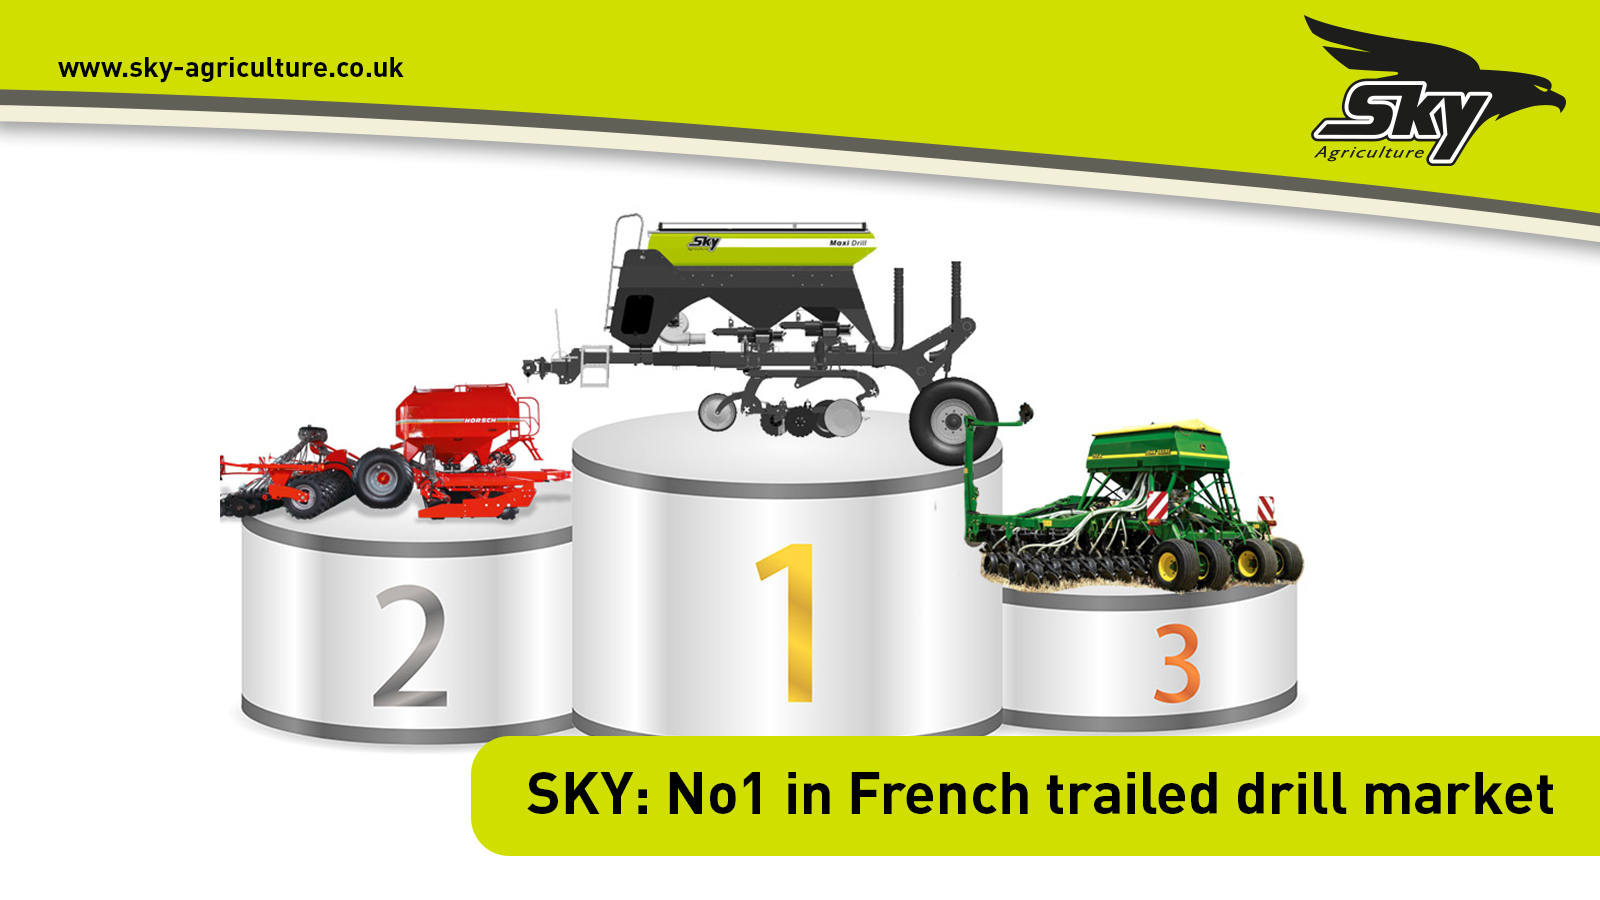 SKY: No 1 in French trailed drill market